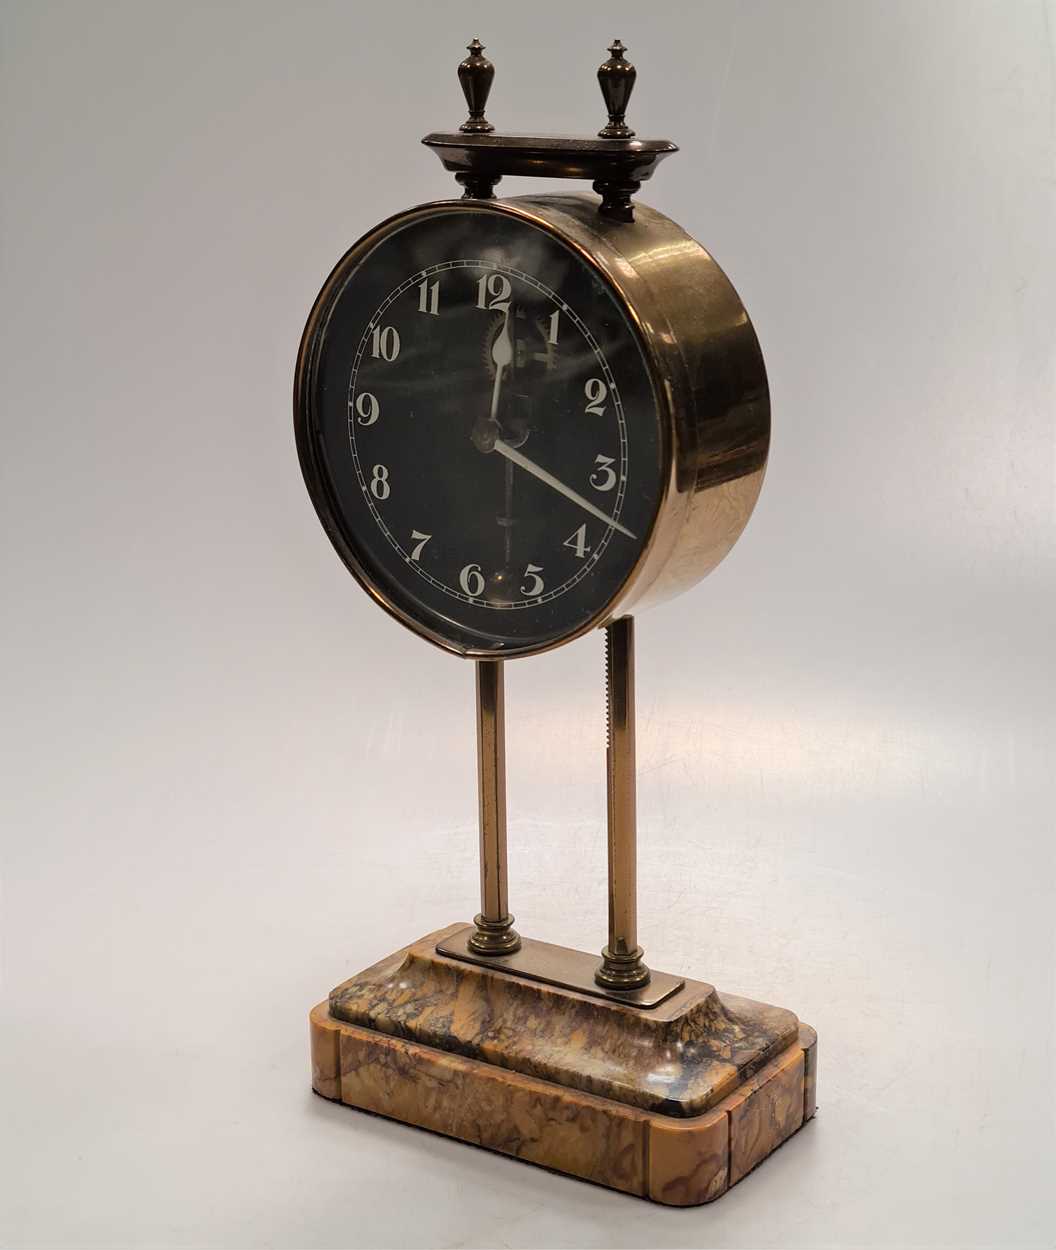 A British made gravity clock with 10cm dial, lacquered brass case on marble base, 26cm